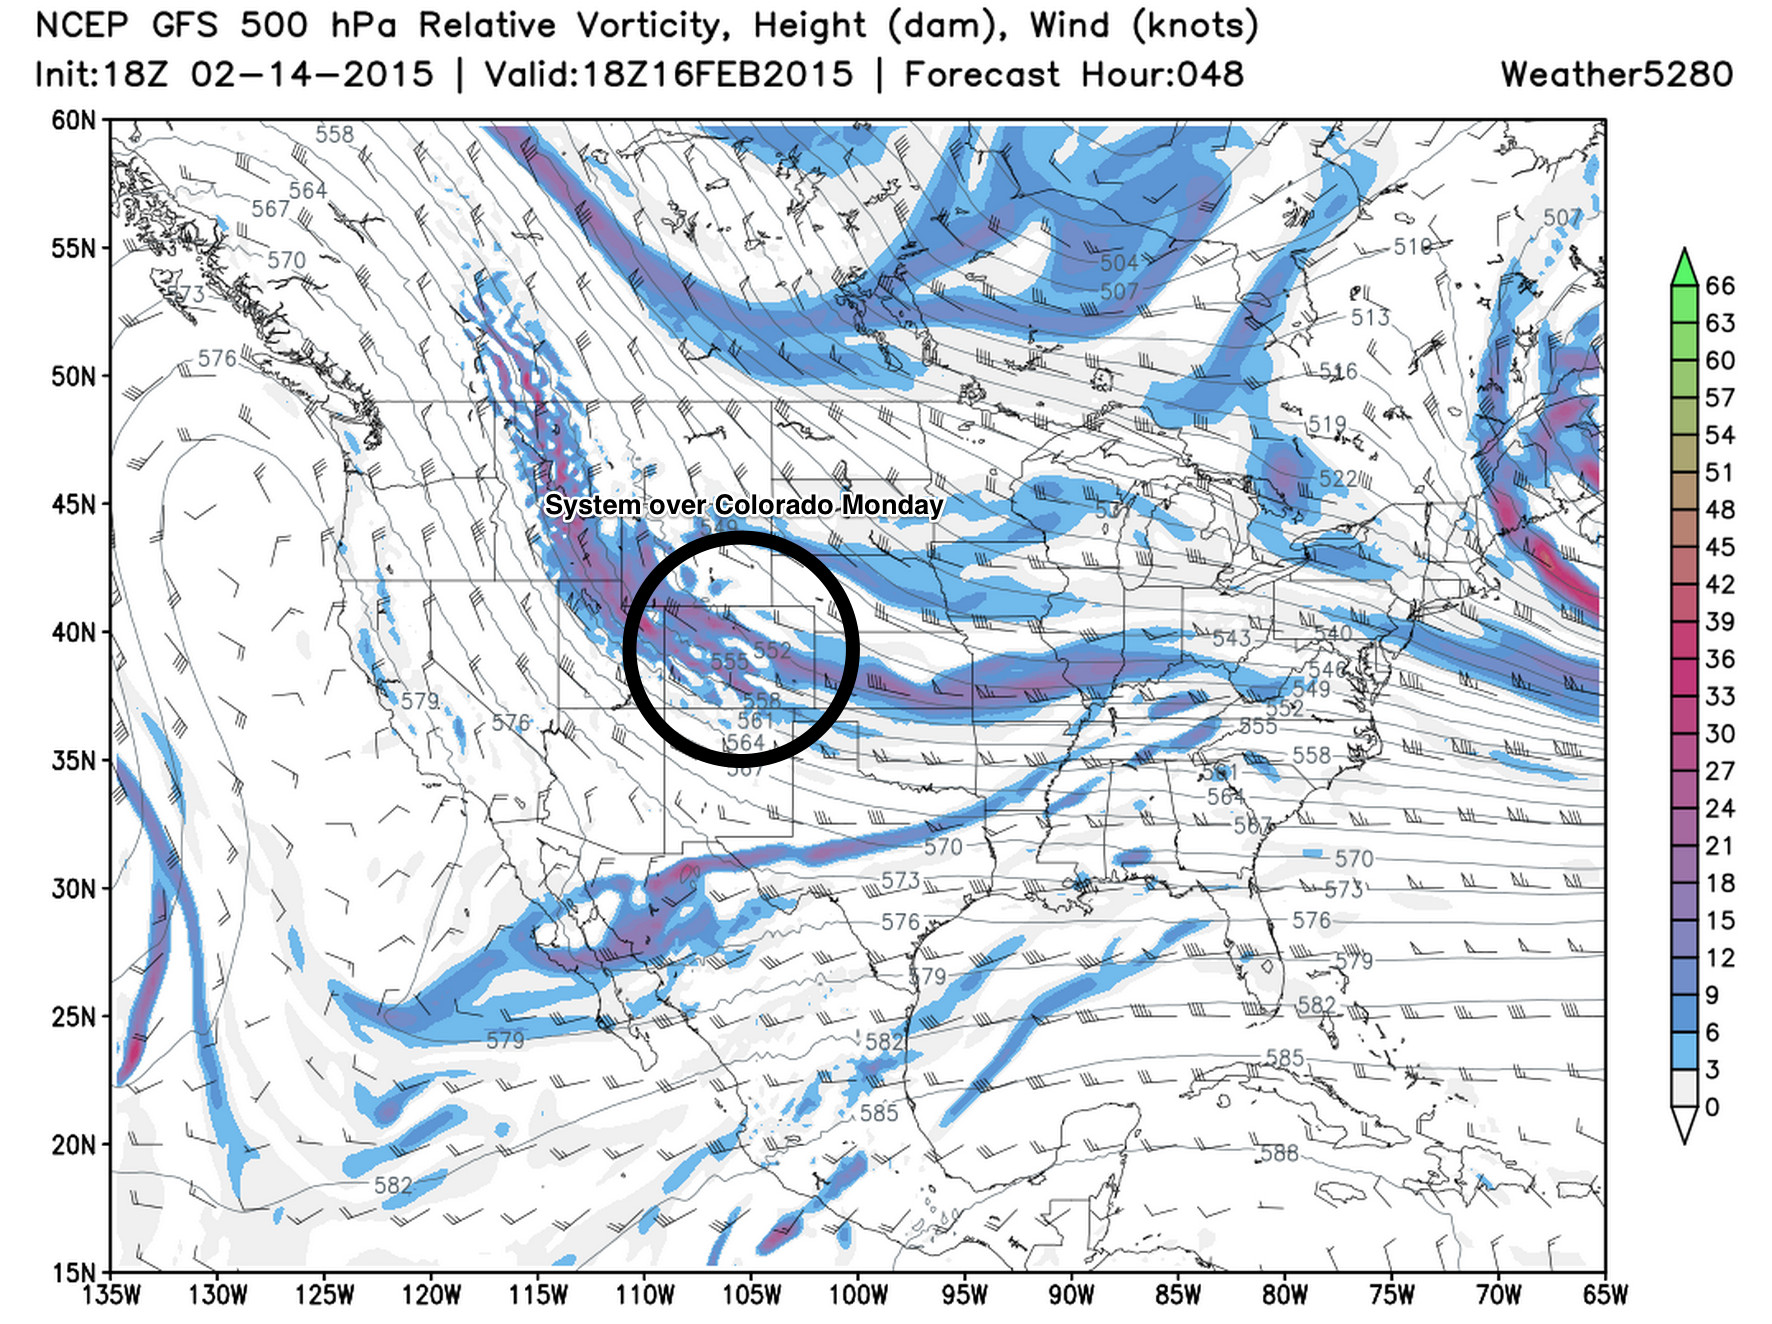 GFS 500 hPa 18z Mon | Relative vorticity and wind | Weather5280 Models